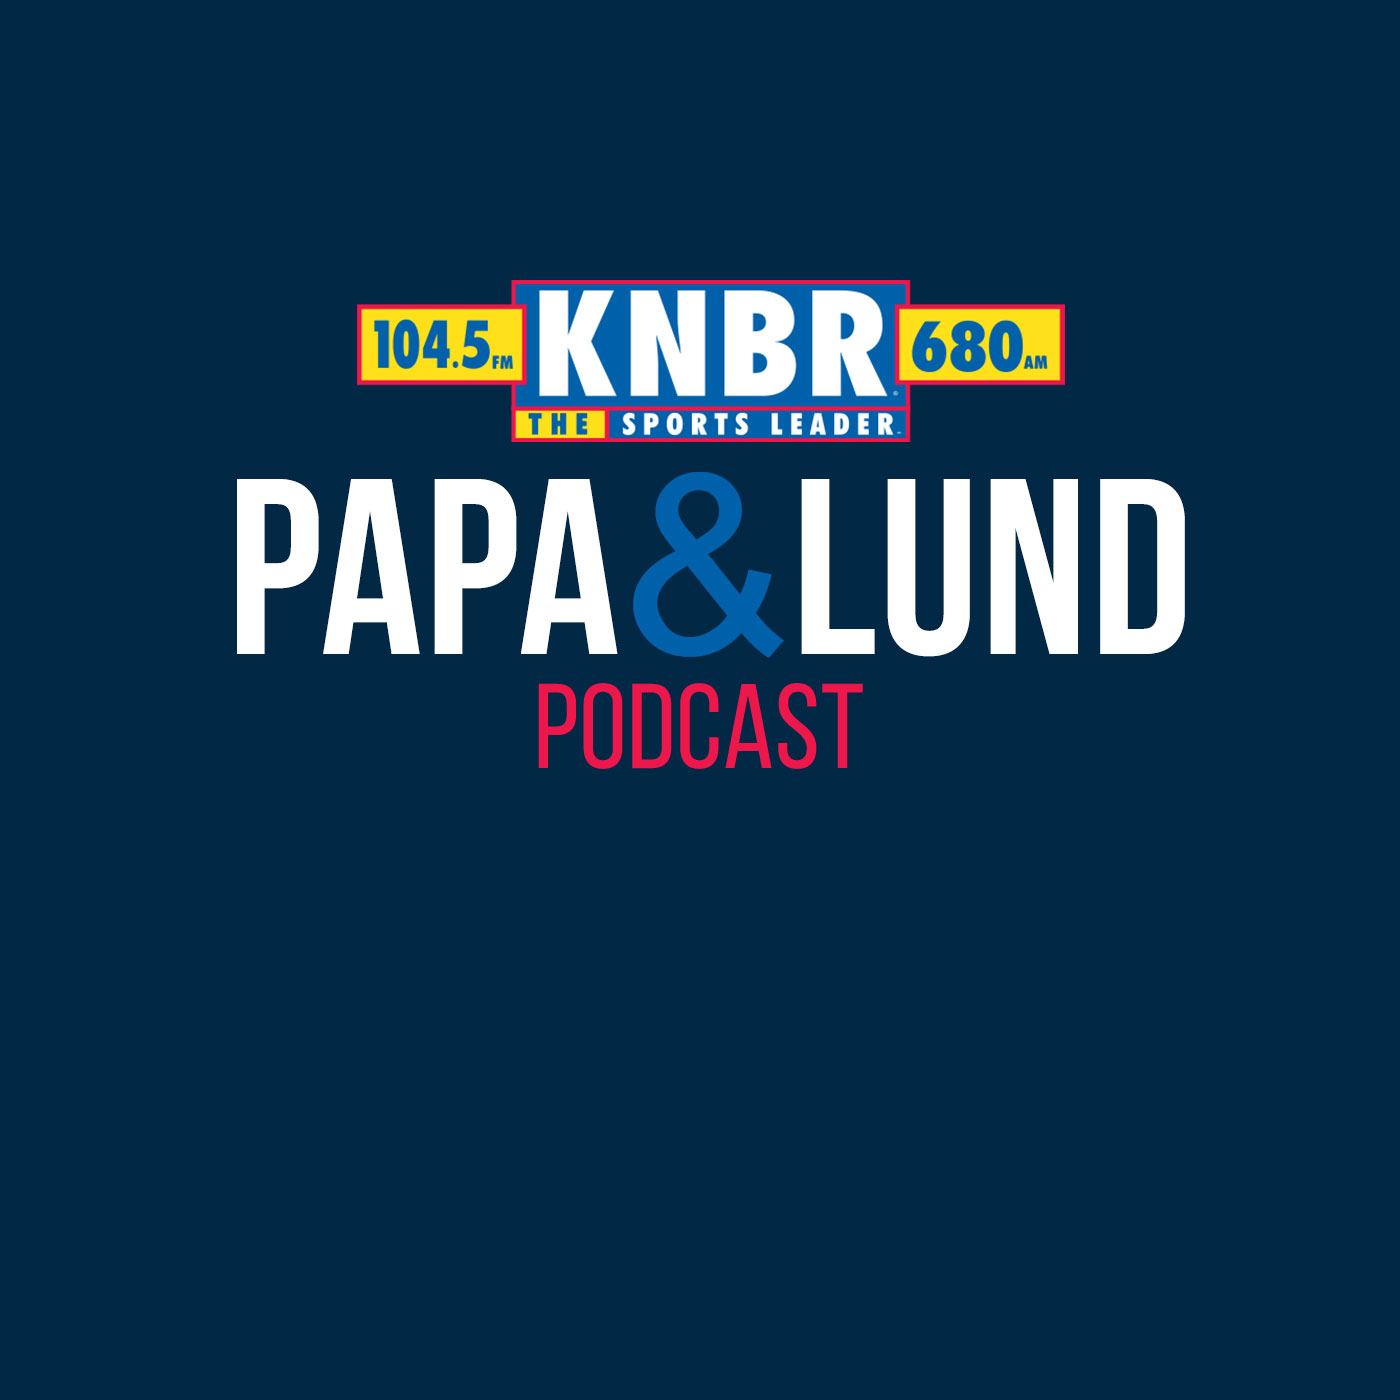 8-7 Kyle Juszczyk joins Papa and Lund LIVE from 49ers training camp to discuss the superstar power of the 49ers offense and their upcoming preseason game